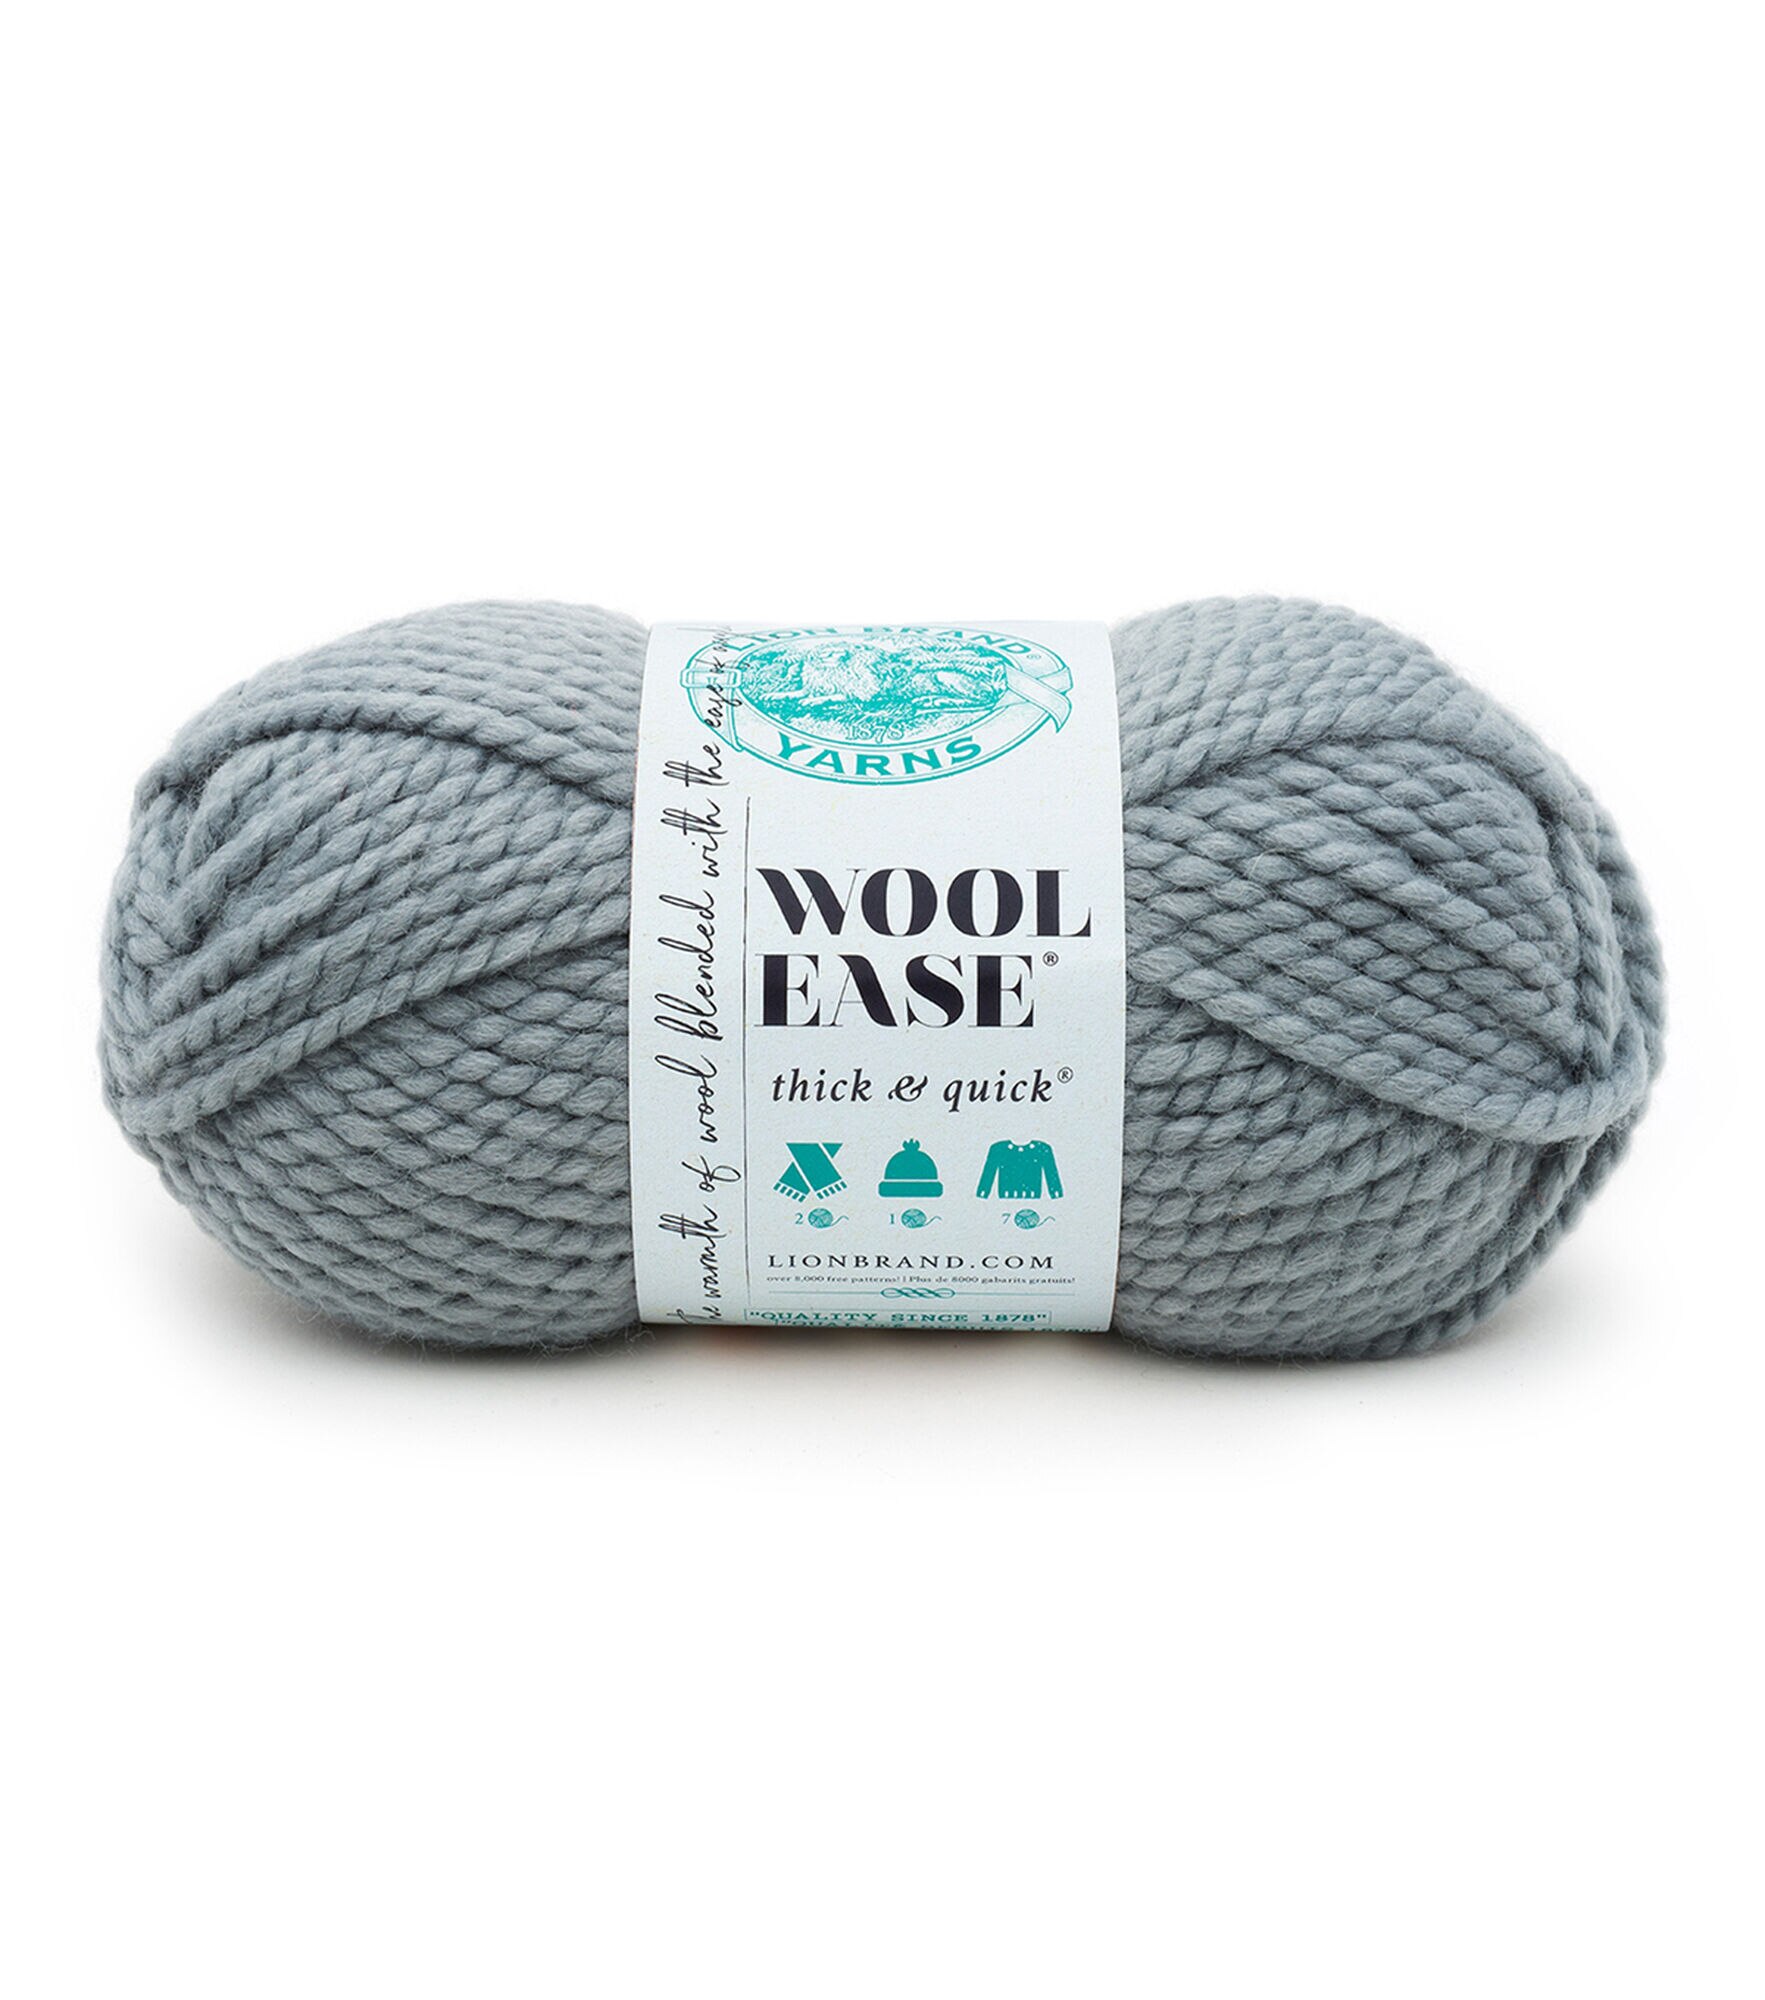 Lion Brand Yarn Wool-Ease Thick & Quick Yarn, Soft and Bulky Yarn for  Knitting, Crocheting, and Crafting, 1 Skein, Coney Island